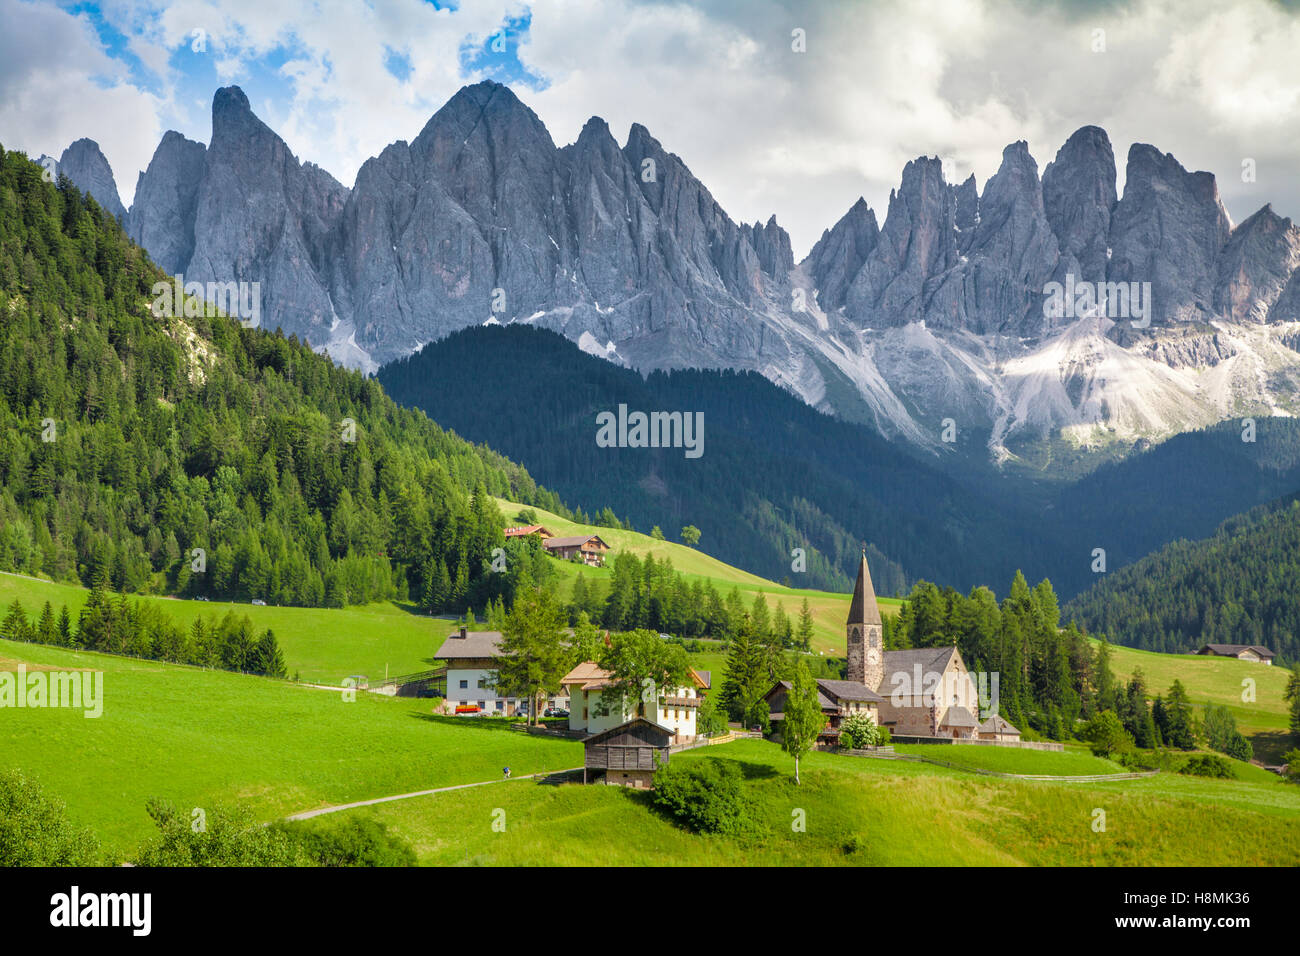 Idyllic mountain scenery in the Dolomites with famous Santa Maddalena mountain village, Val di Funes, South Tyrol, Italy Stock Photo